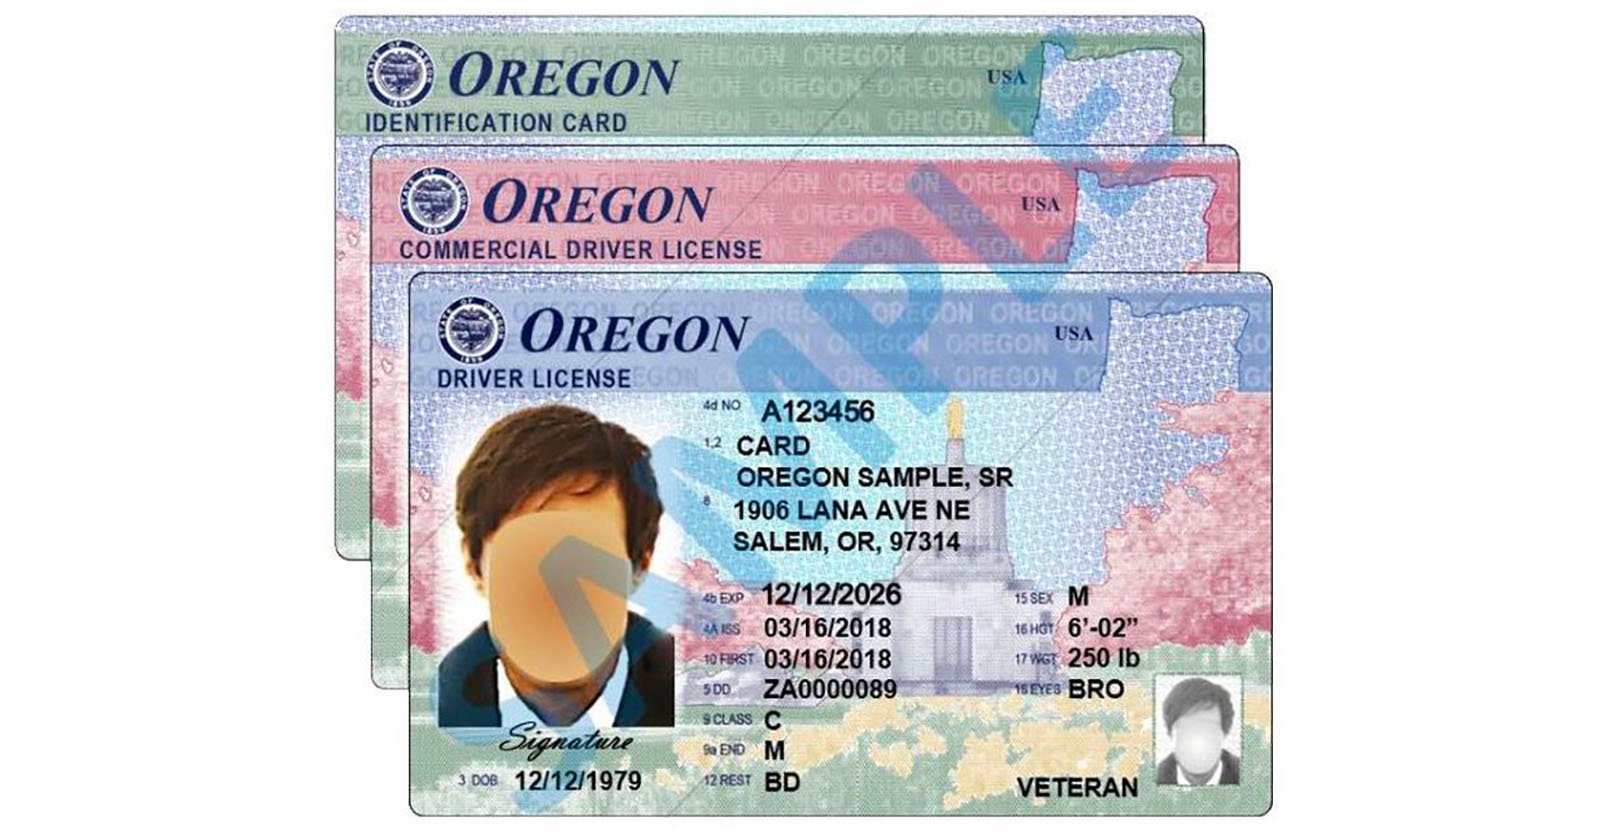 Statewide Camera Outage Leaves Oregonians Unable to Get ID Photos PetaPixel image image